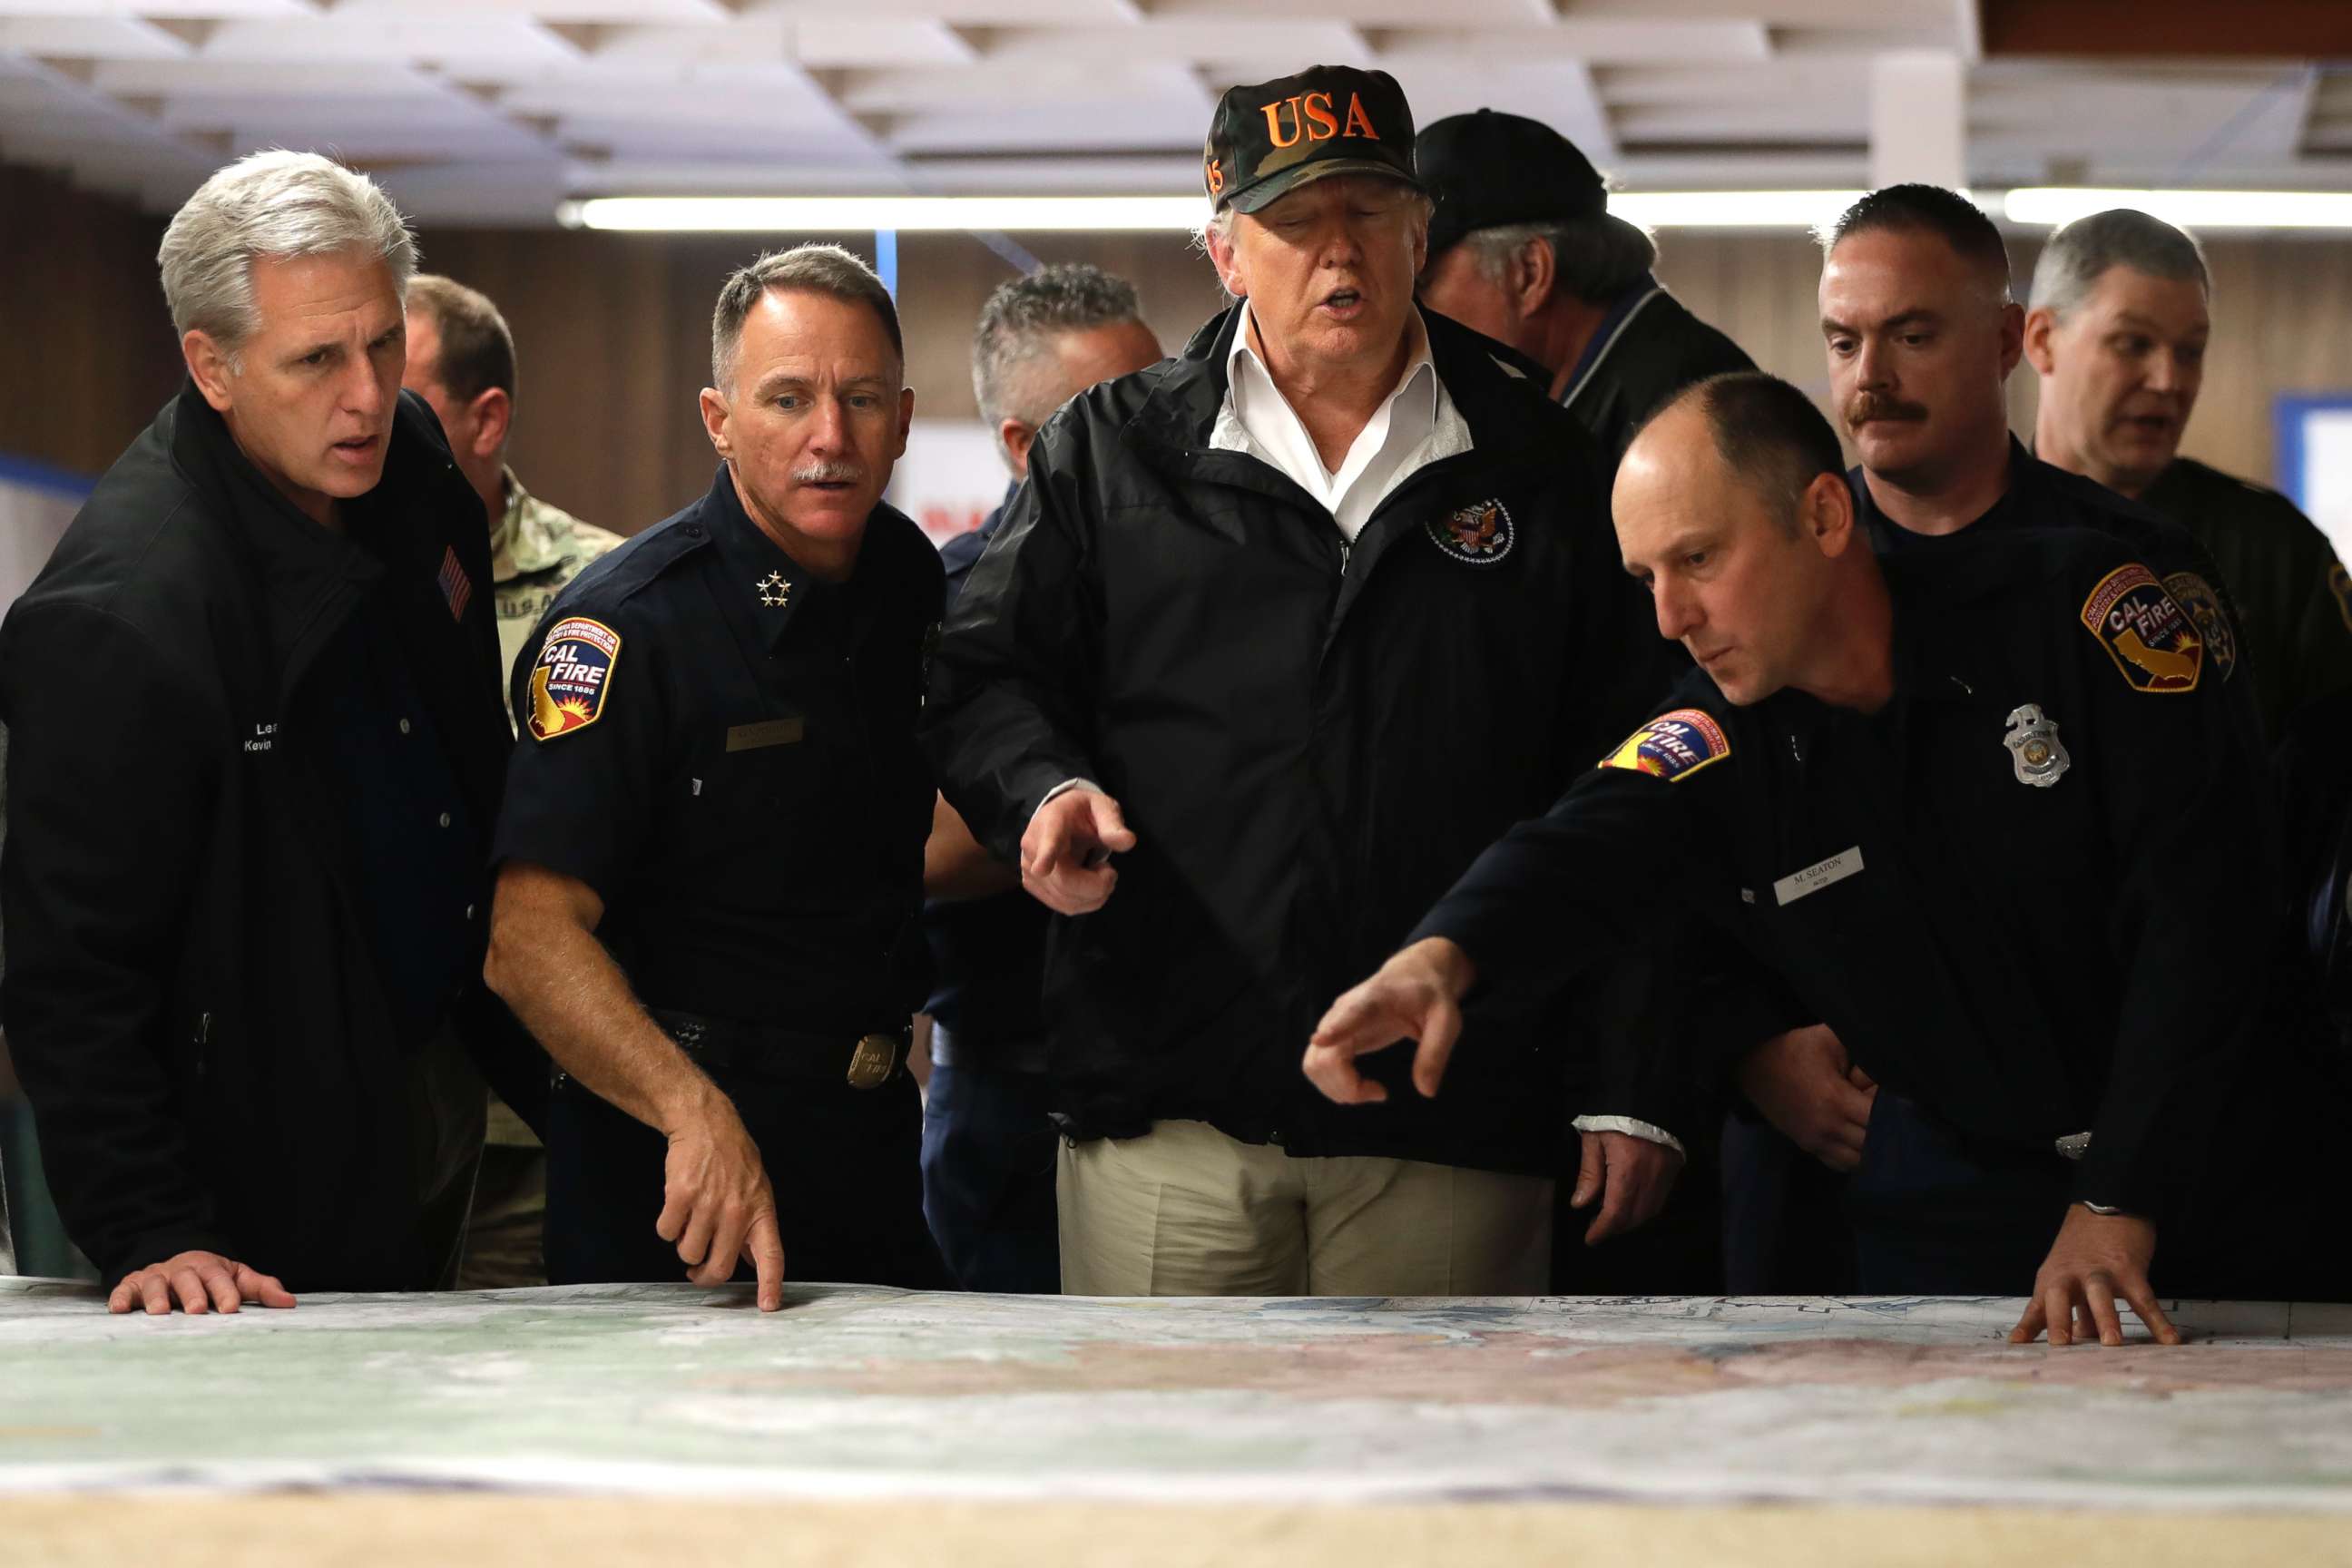 PHOTO: President Donald Trump looks at a map as he visits with first responders and local officials at an operations center responding to the wildfires, Nov. 17, 2018, in Chico, Calif.